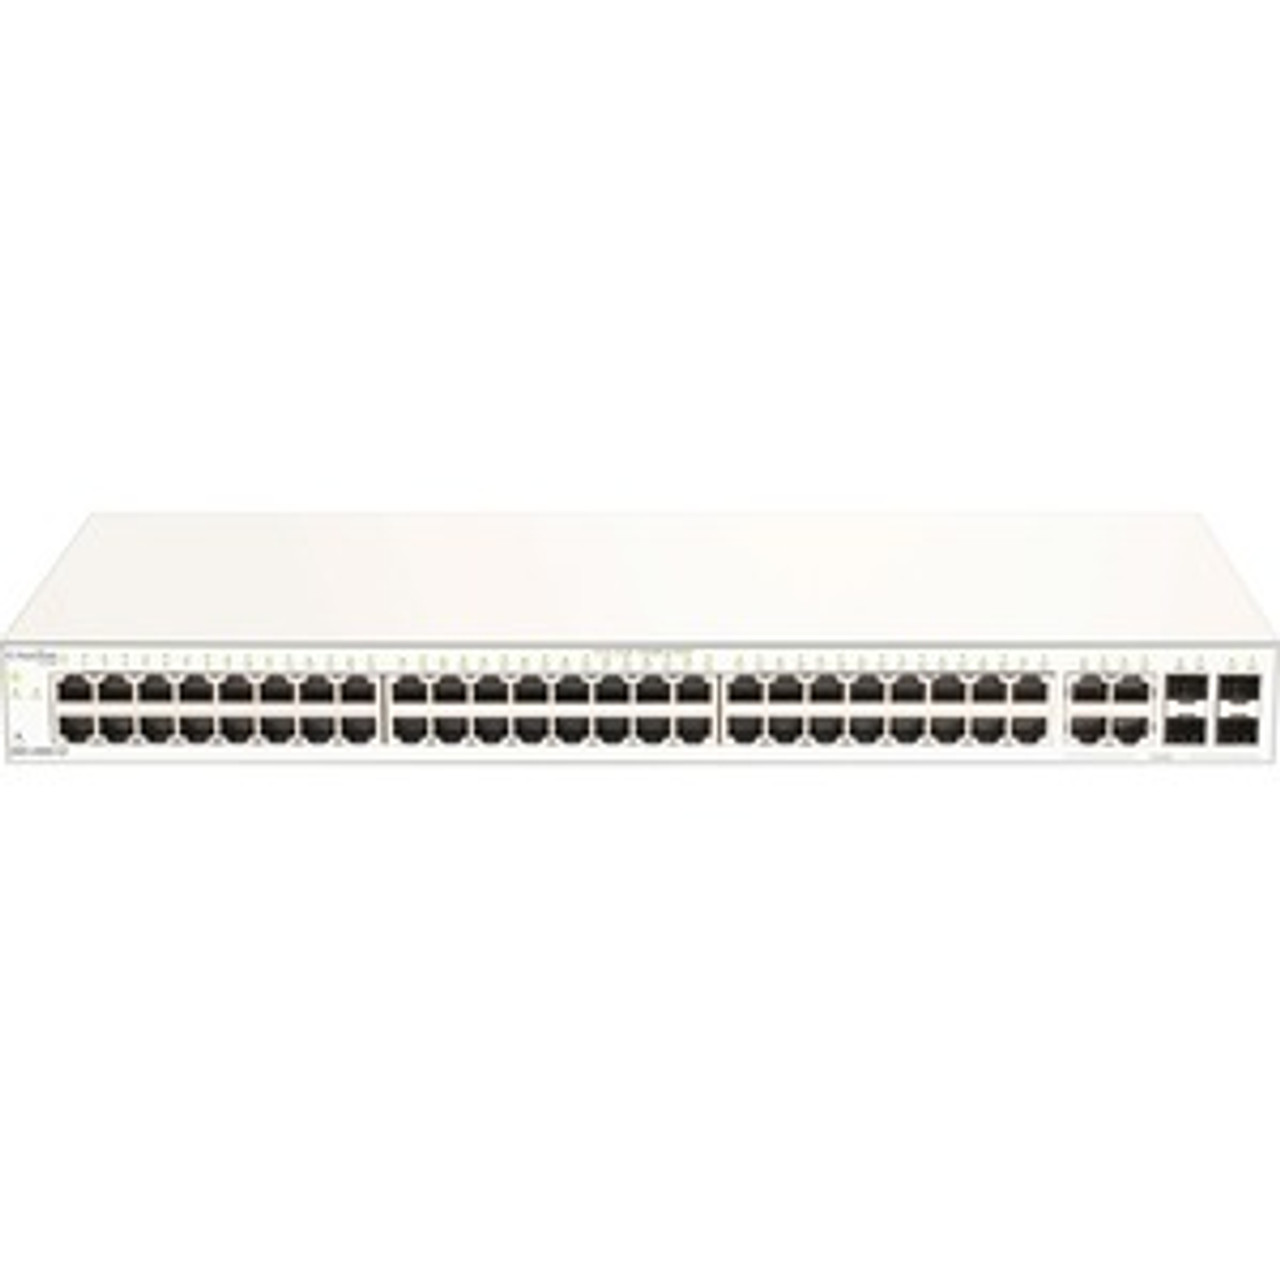 DBS-2000-52 D-Link Nuclias Cloud-Managed 48-Ports 10/100/1000 Switch with 4x Combo SFP Ports (Refurbished)